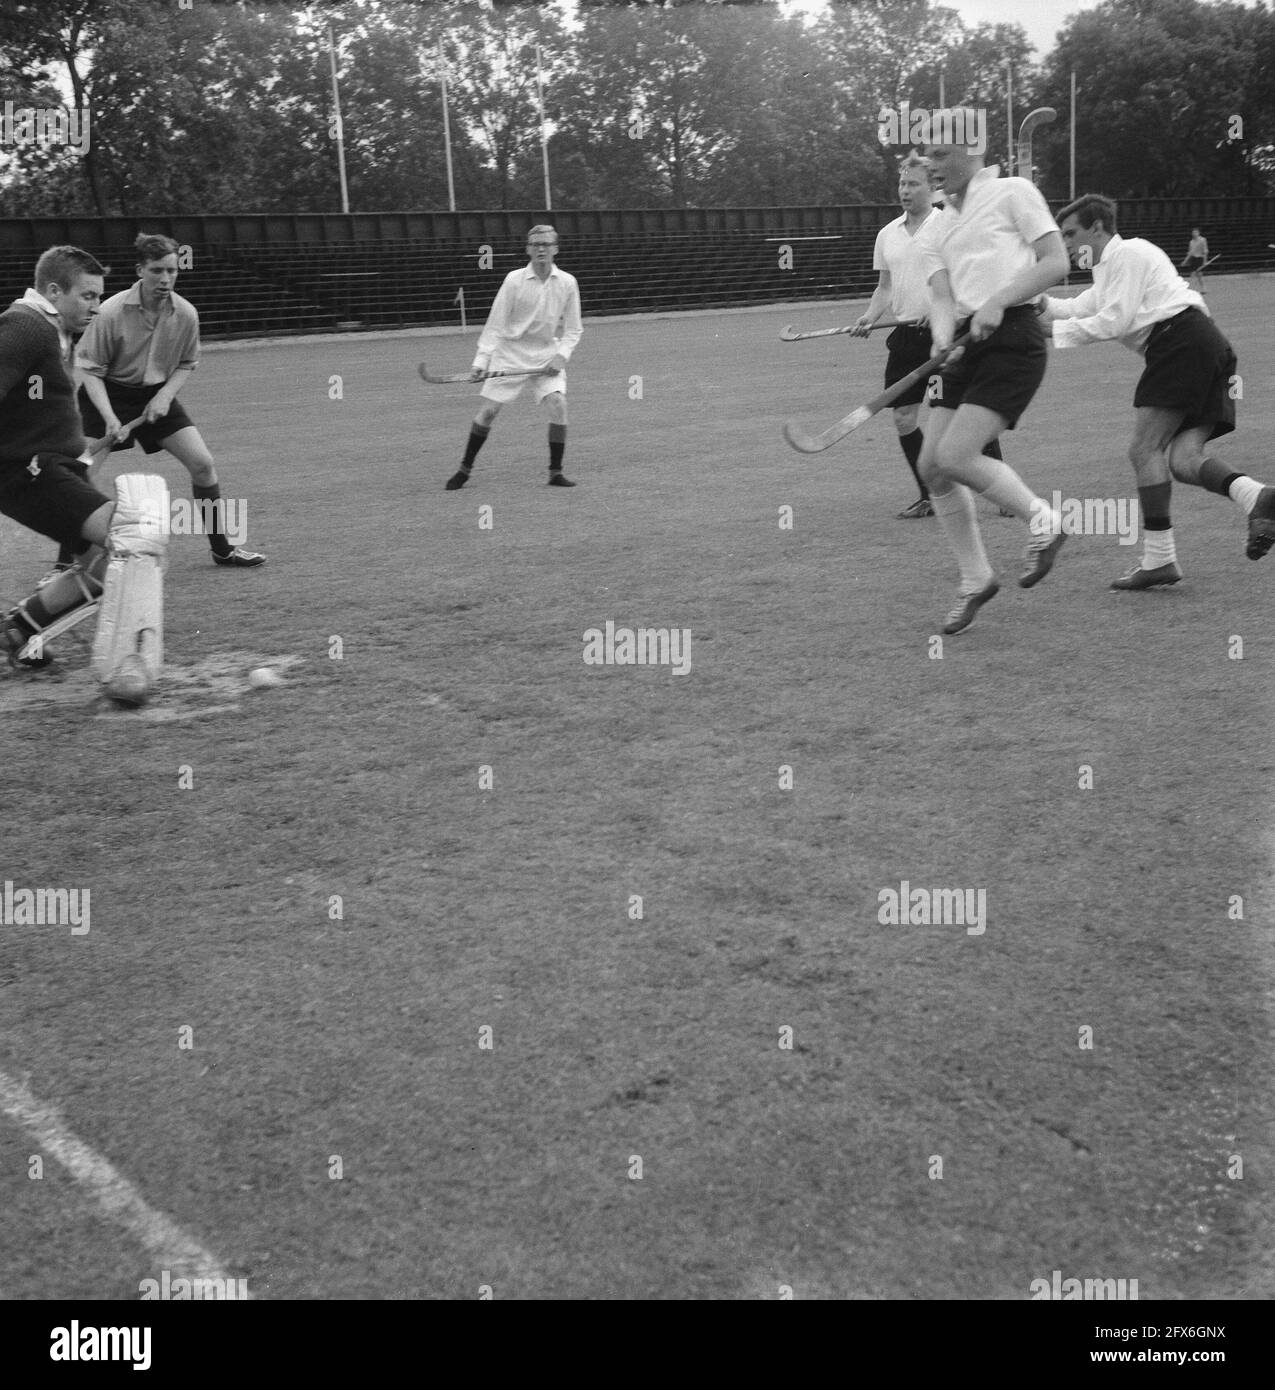 Hockey ASC against Rest of the Netherlands as part of the Lustrumfeesten (game moment), June 28, 1962, field hockey, lustrumfeesten, The Netherlands, 20th century press agency photo, news to remember, documentary, historic photography 1945-1990, visual stories, human history of the Twentieth Century, capturing moments in time Stock Photo